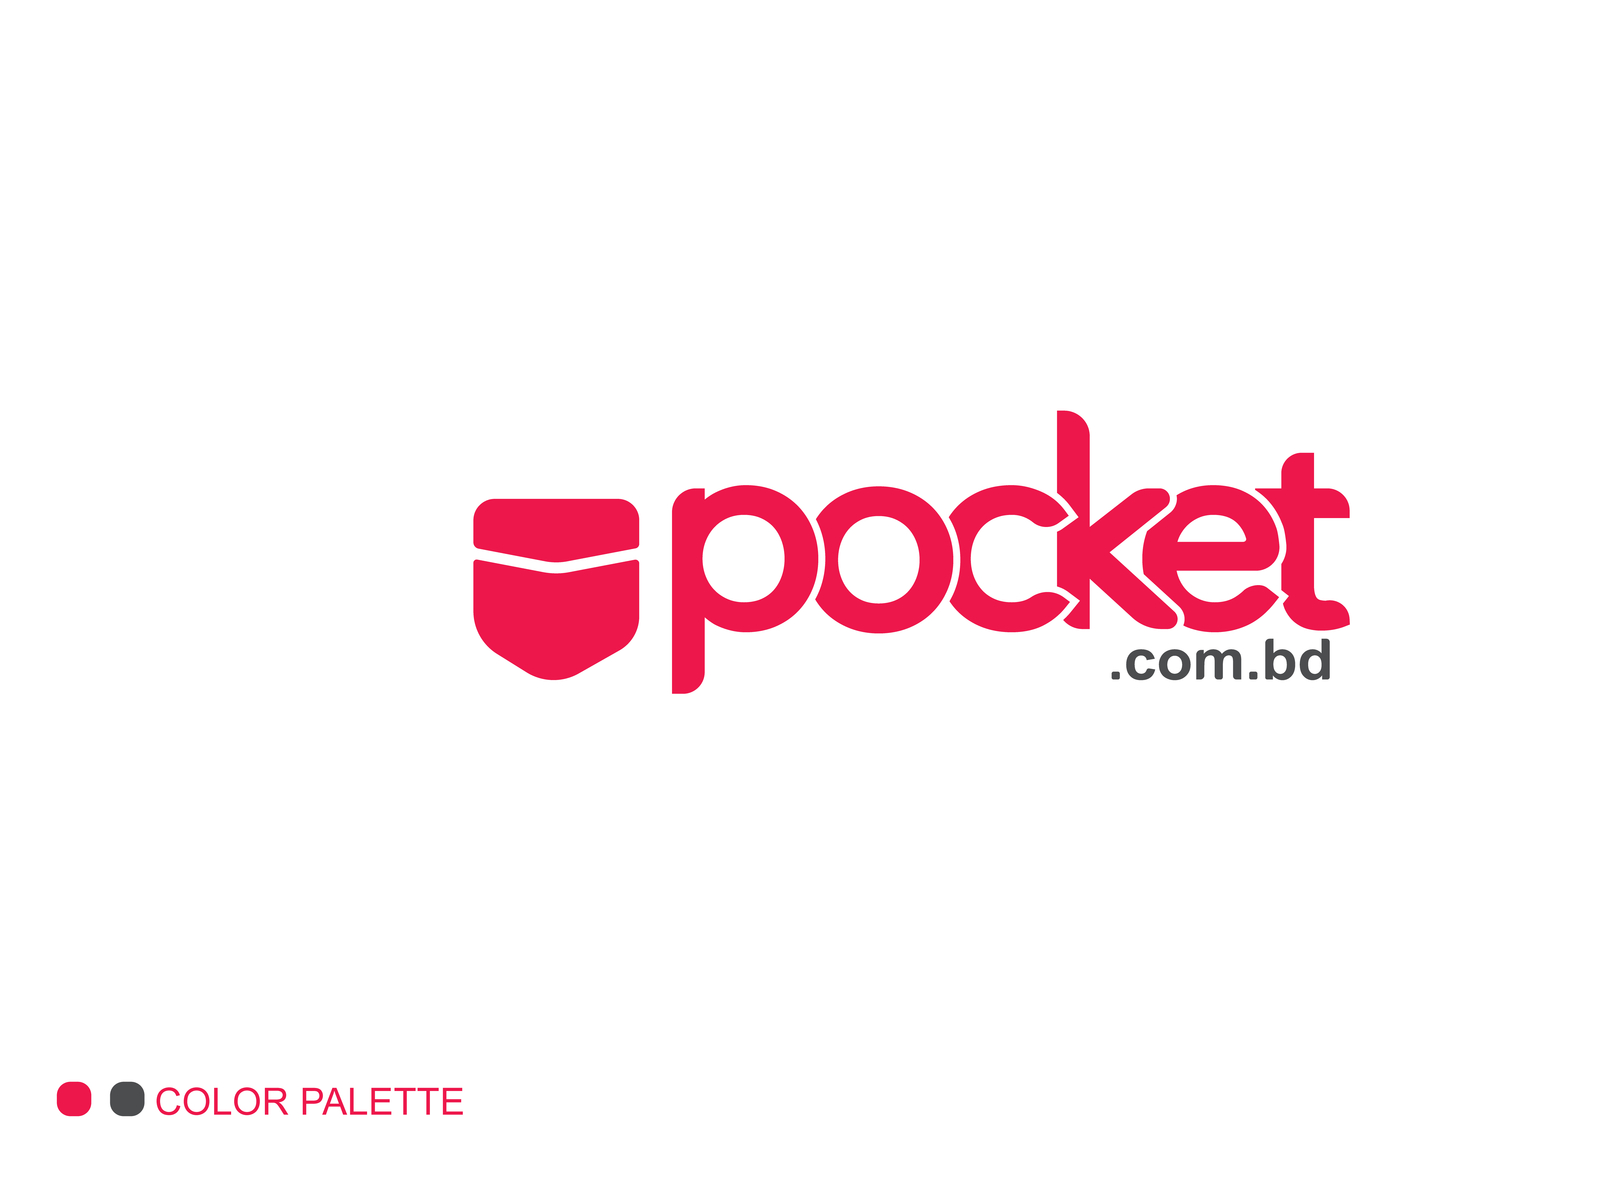 Freelance Design, Interaction and Production Services - Creative Pocket